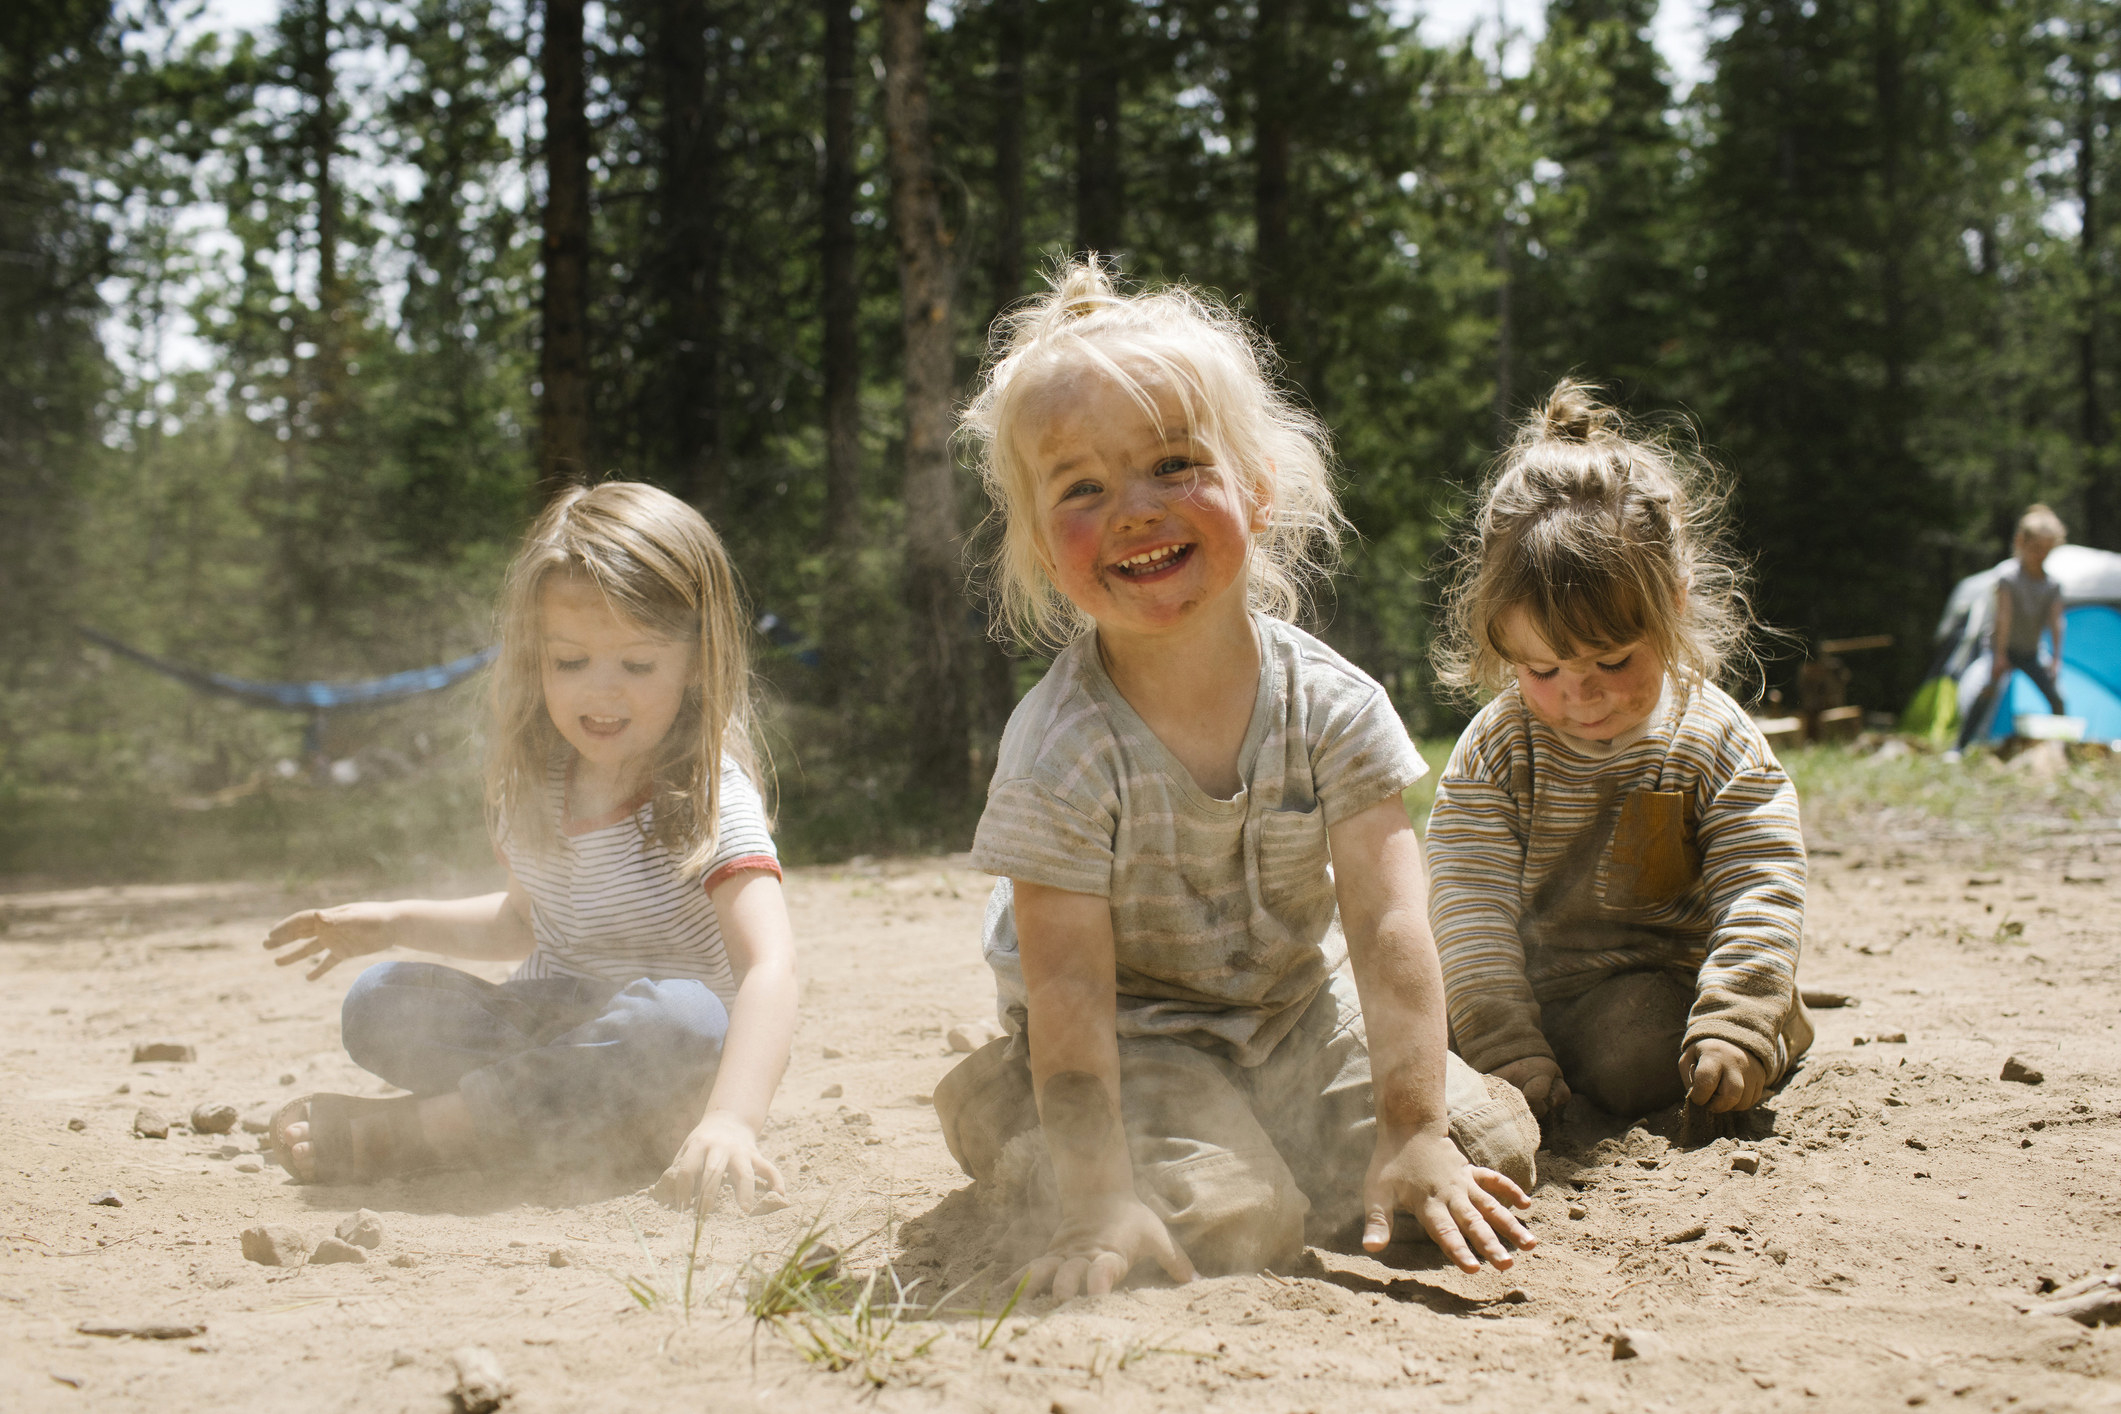 Kids playing in the dirt